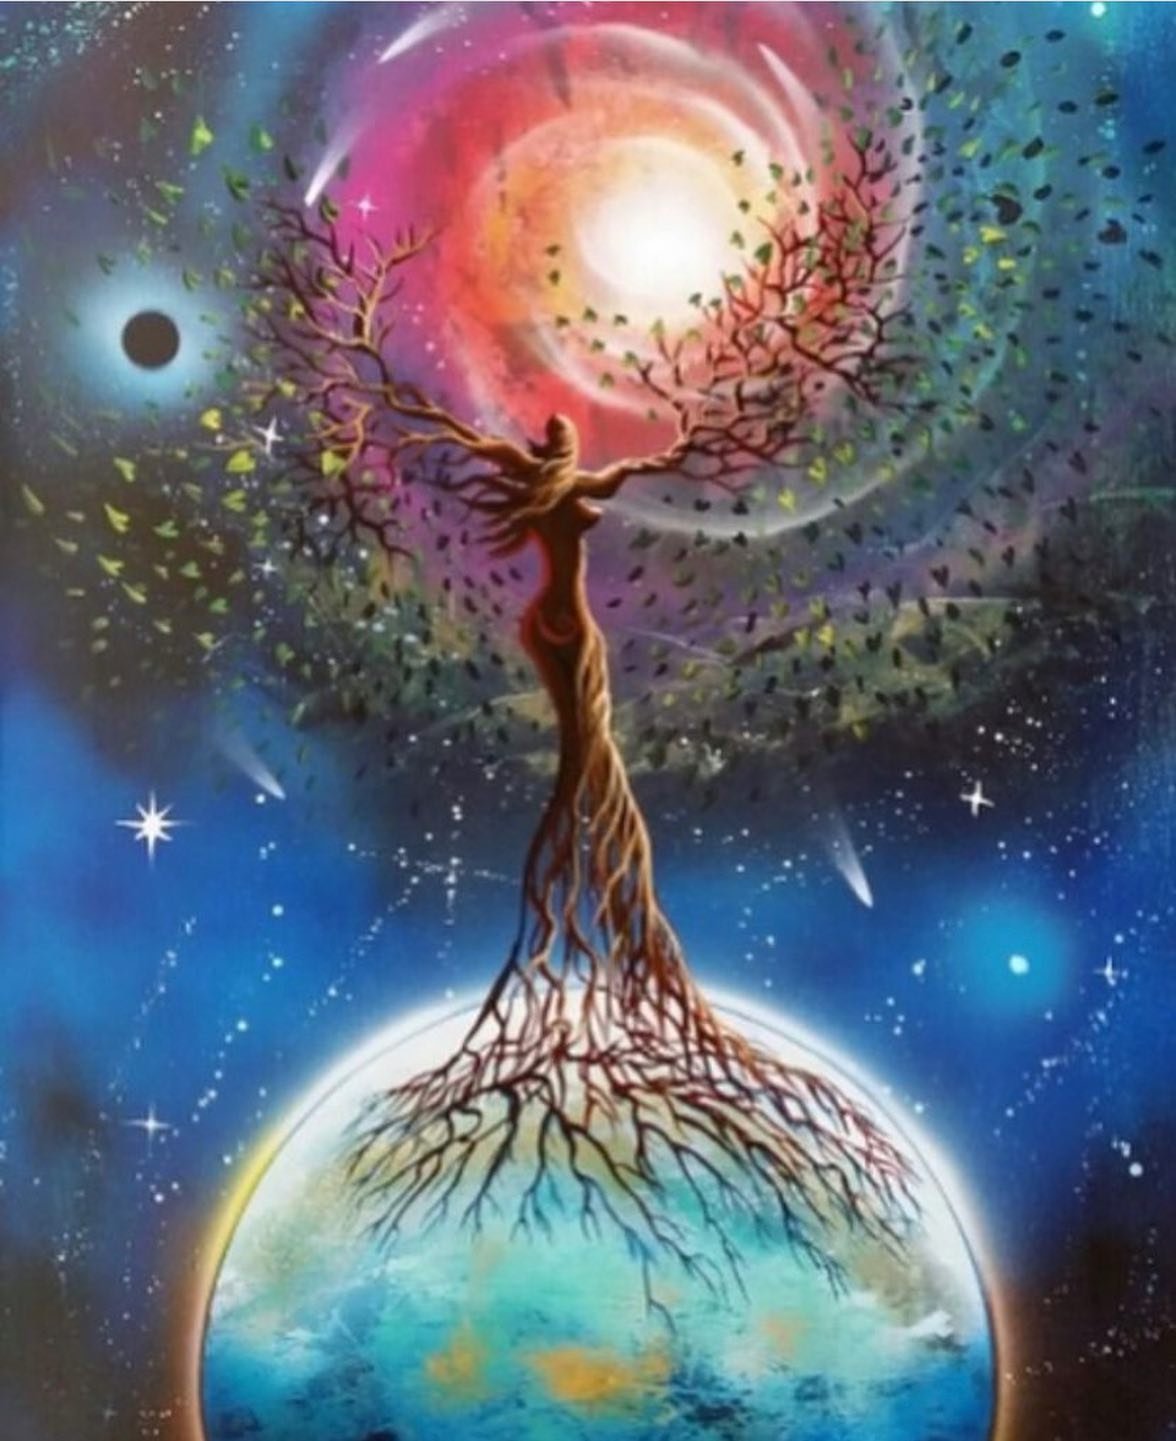 5 | 5 PORTAL 
✨Galactic Gaia CHANNEL✨
You FEEL it, don&rsquo;t you?
The Cosmic shift
It&rsquo;s happening
Not only in your body
But on a molecular level
Everything is changing 

&hellip;
✨
✨✨

🔑 
TO RECEIVE THE REST OF THE CHANNEL &mdash; 
connect t